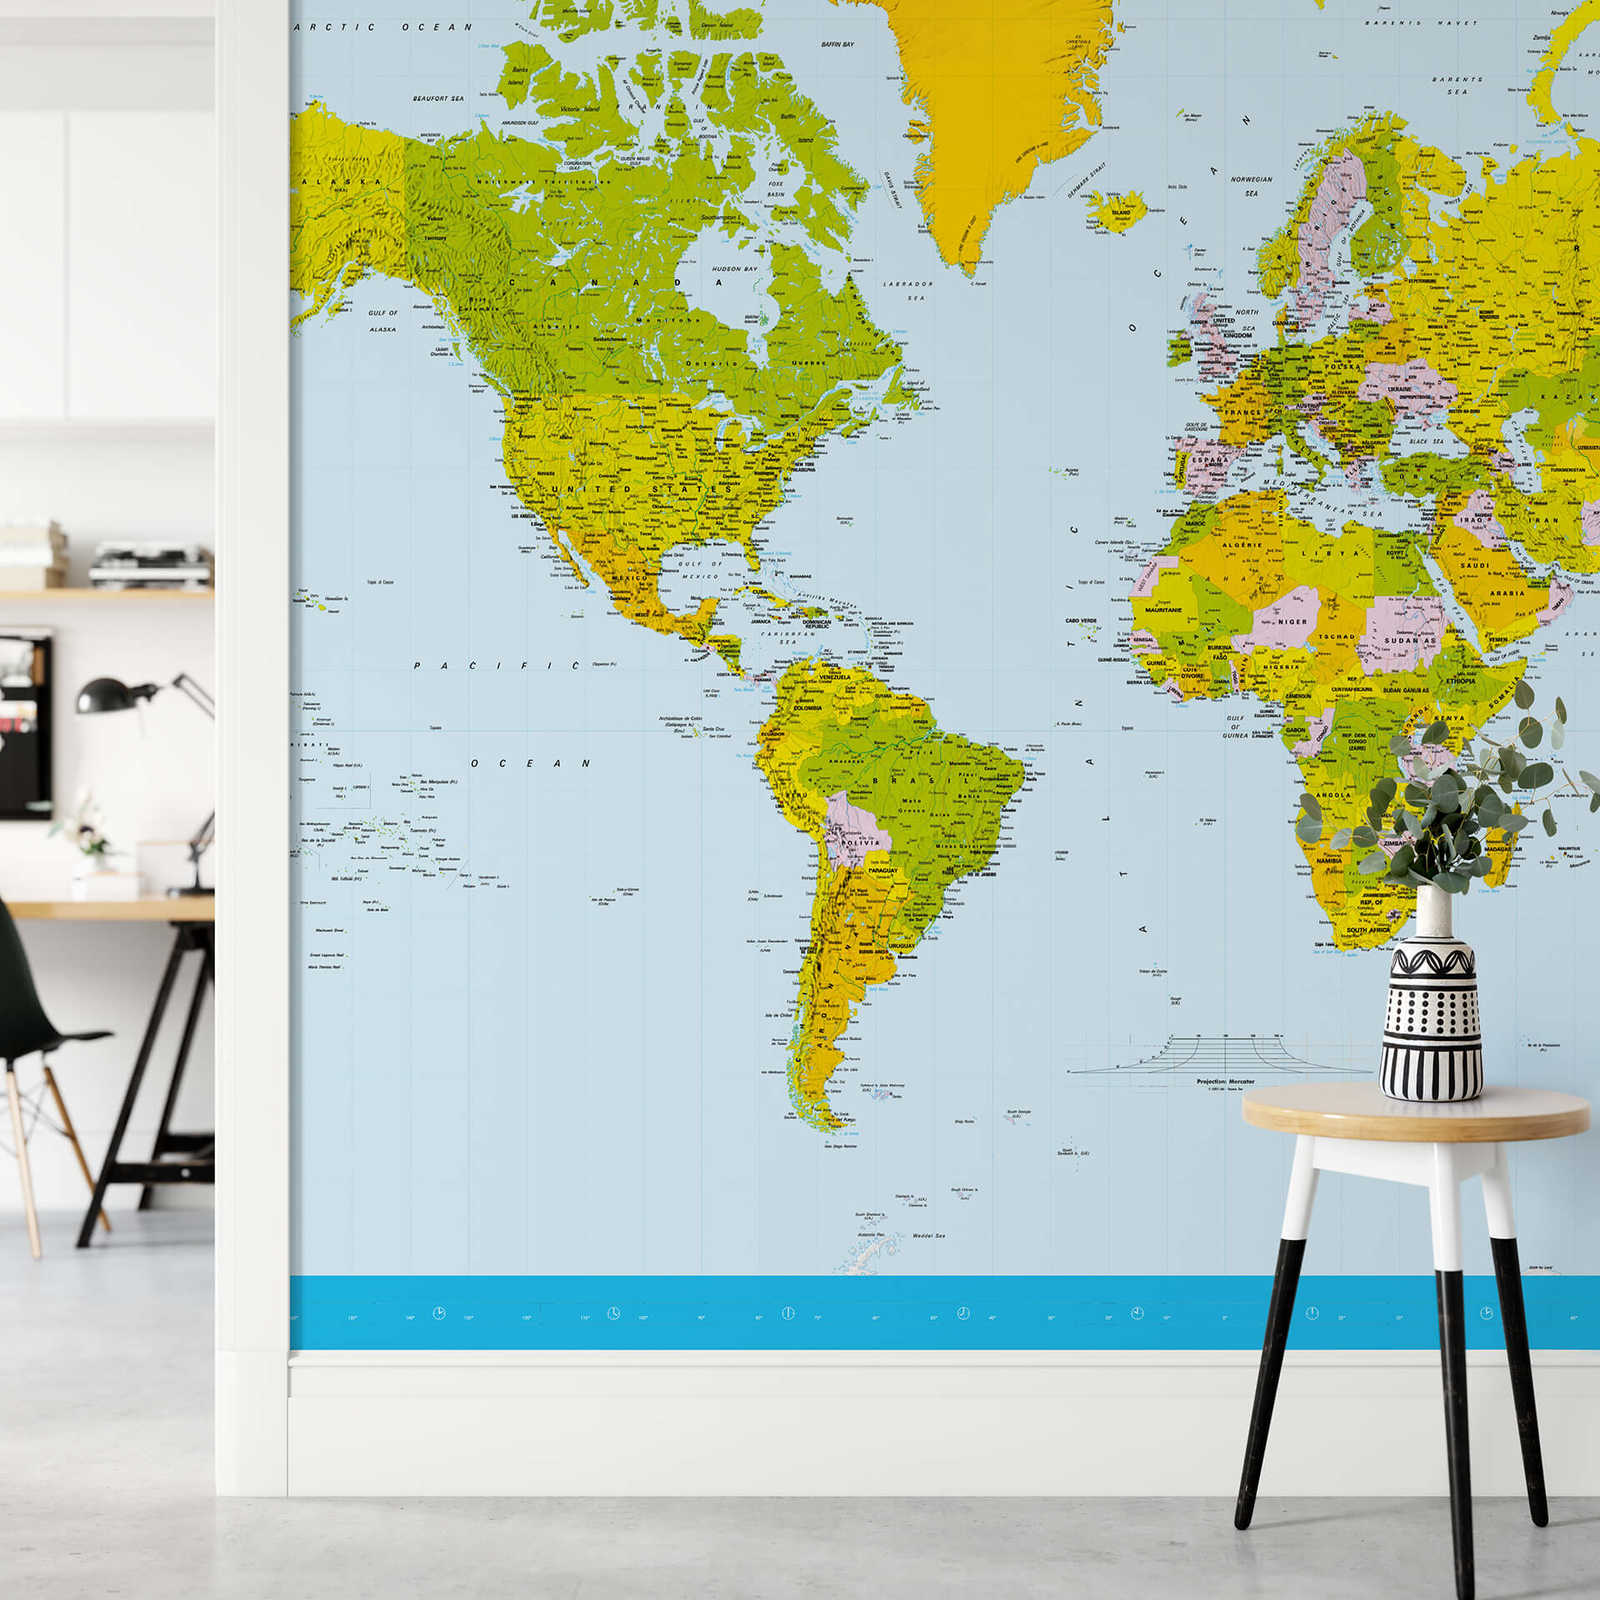             World map motif mural with scale
        